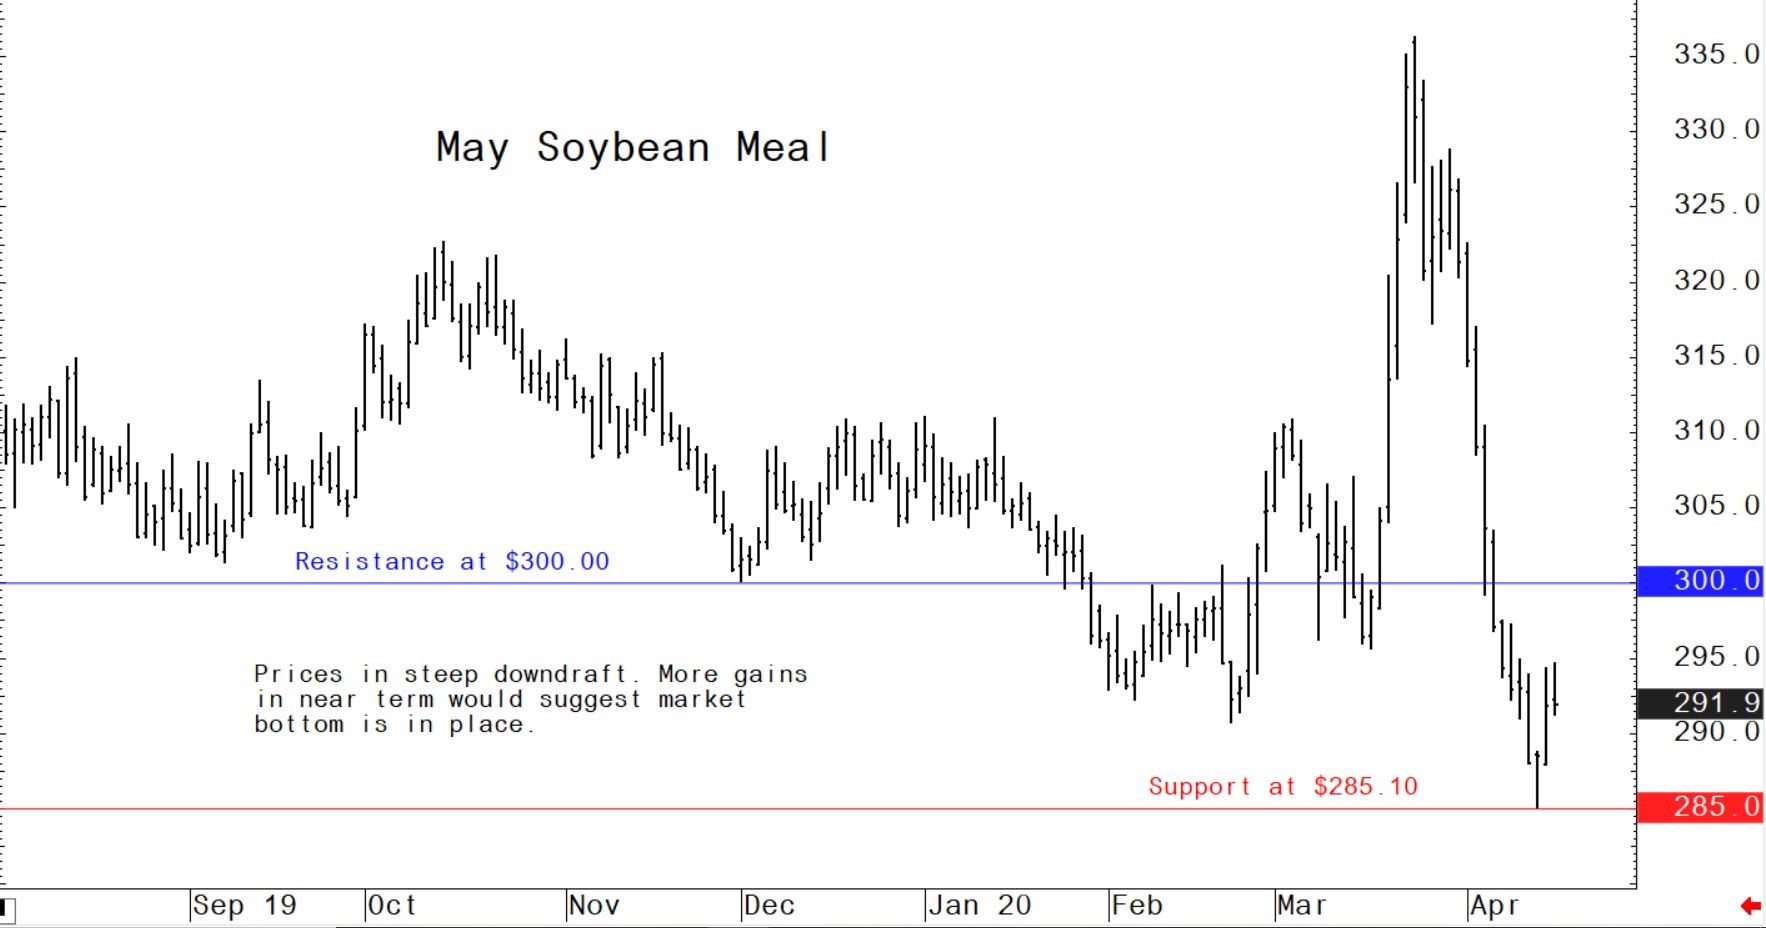 Soybean meal prices in steep downdraft